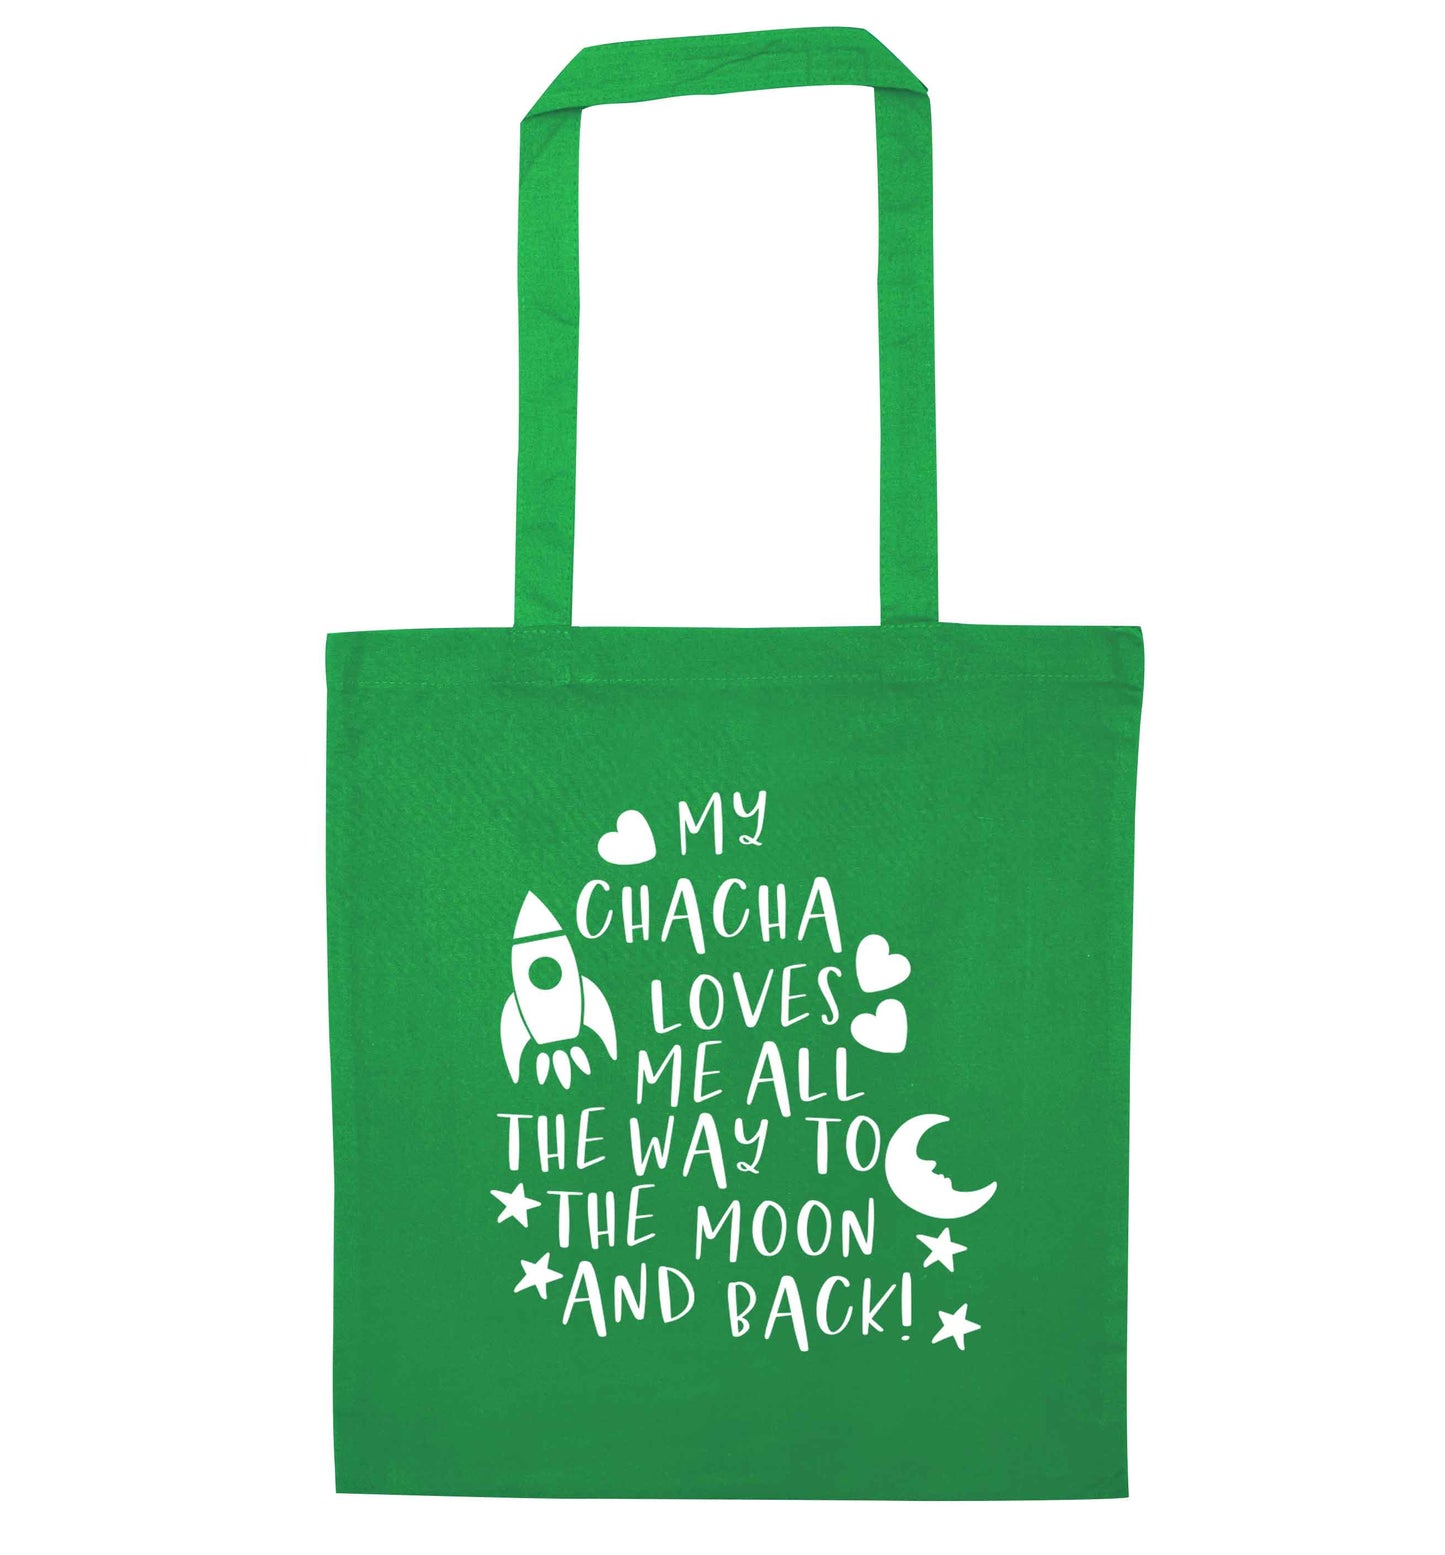 My chacha loves me all the way to the moon and back green tote bag